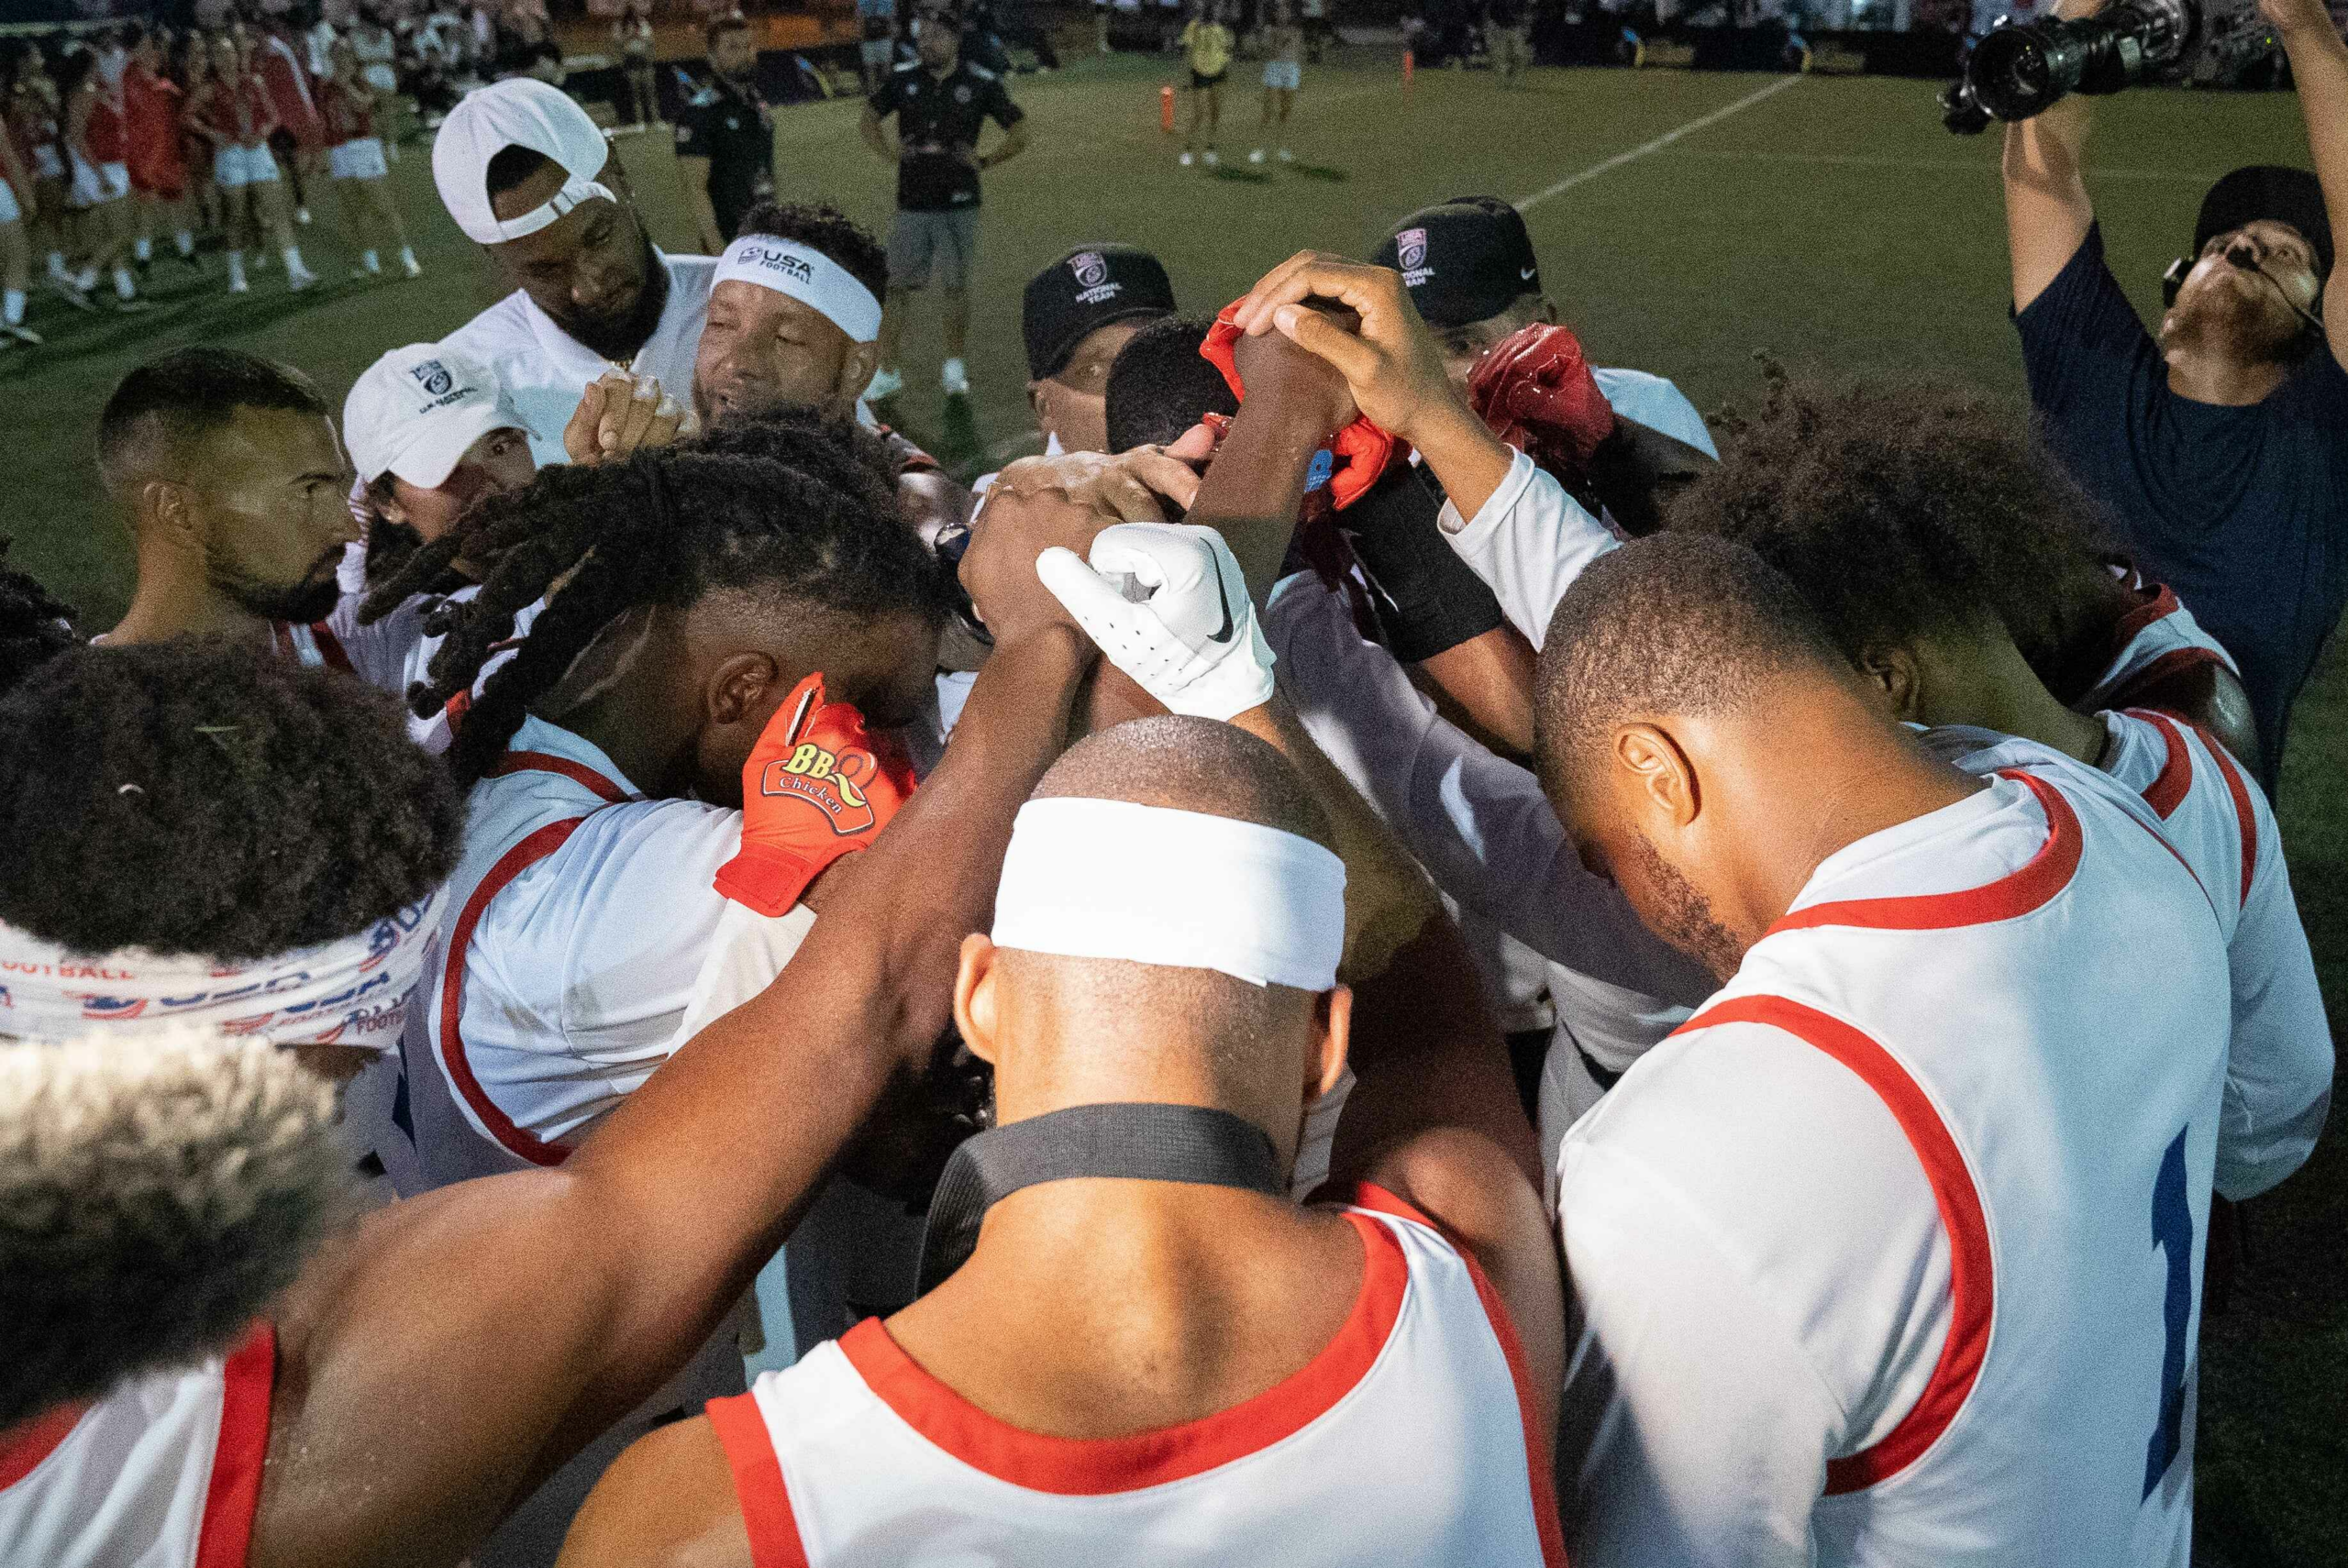 Bruce Mapp (No. 1) and the U.S. Men's Flag National Team huddle before a game.